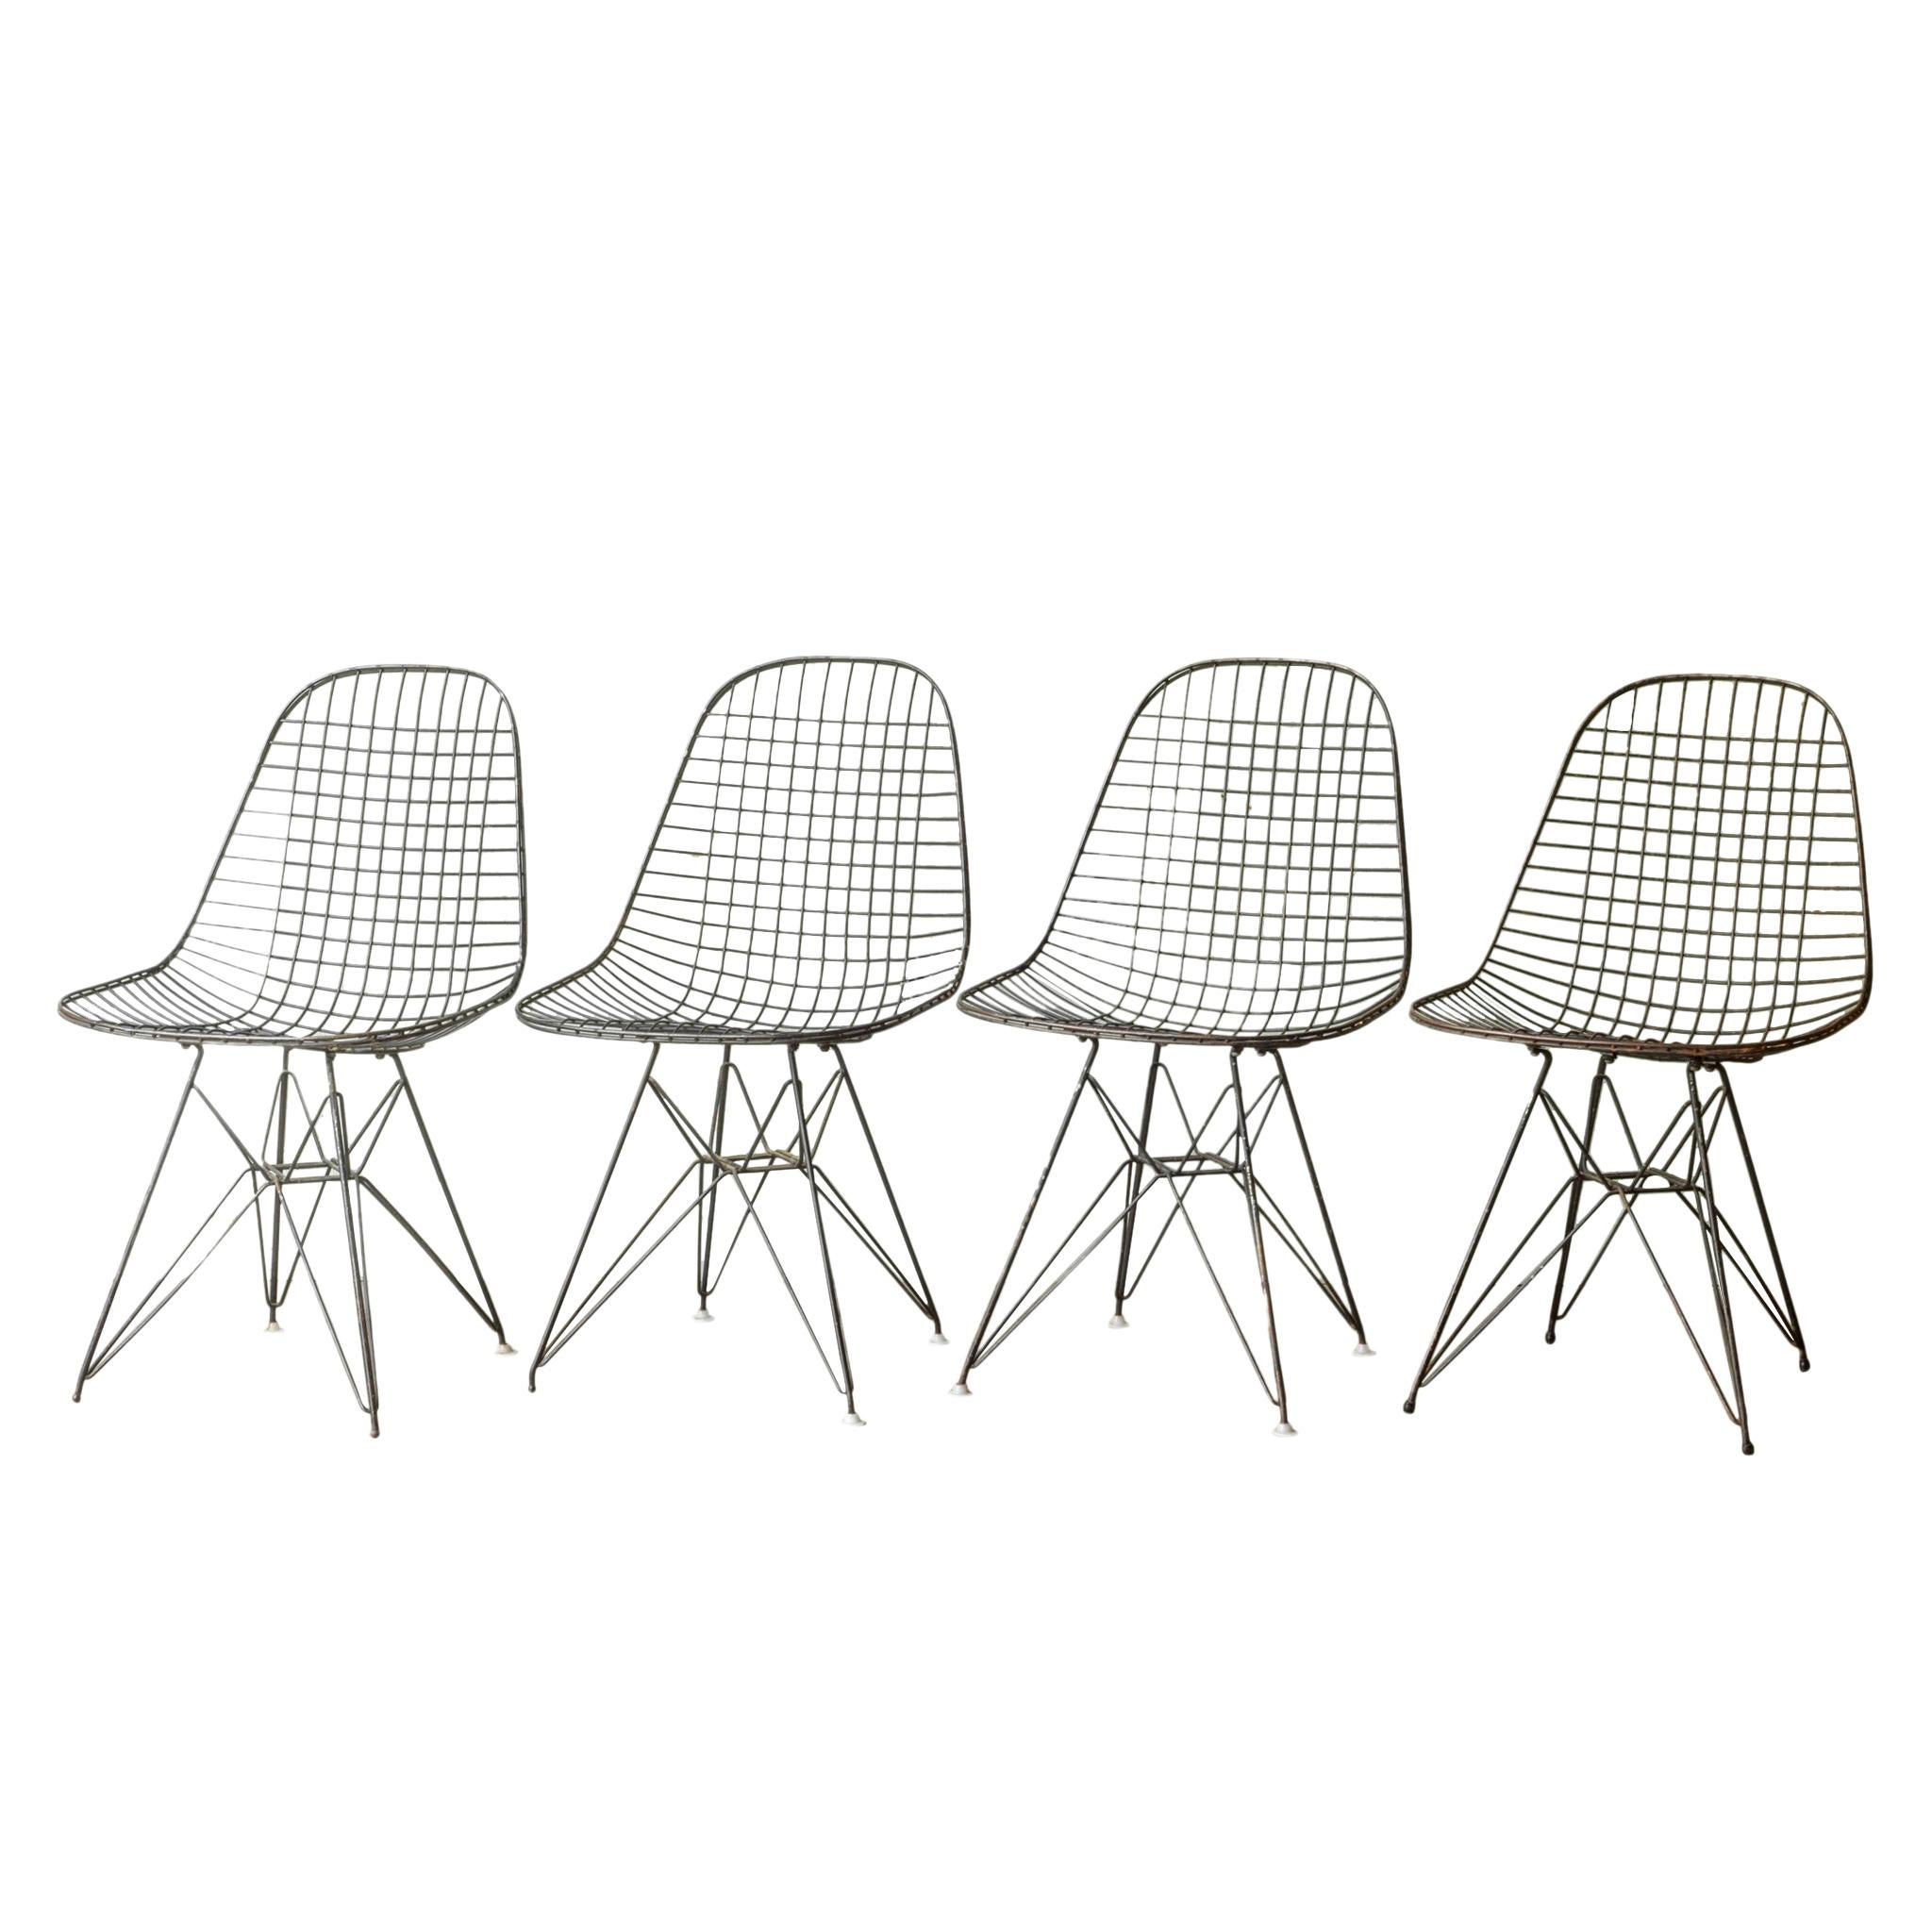 Eames for Herman Miller Wire DKR Chairs, circa 1950 Price is Per Chair